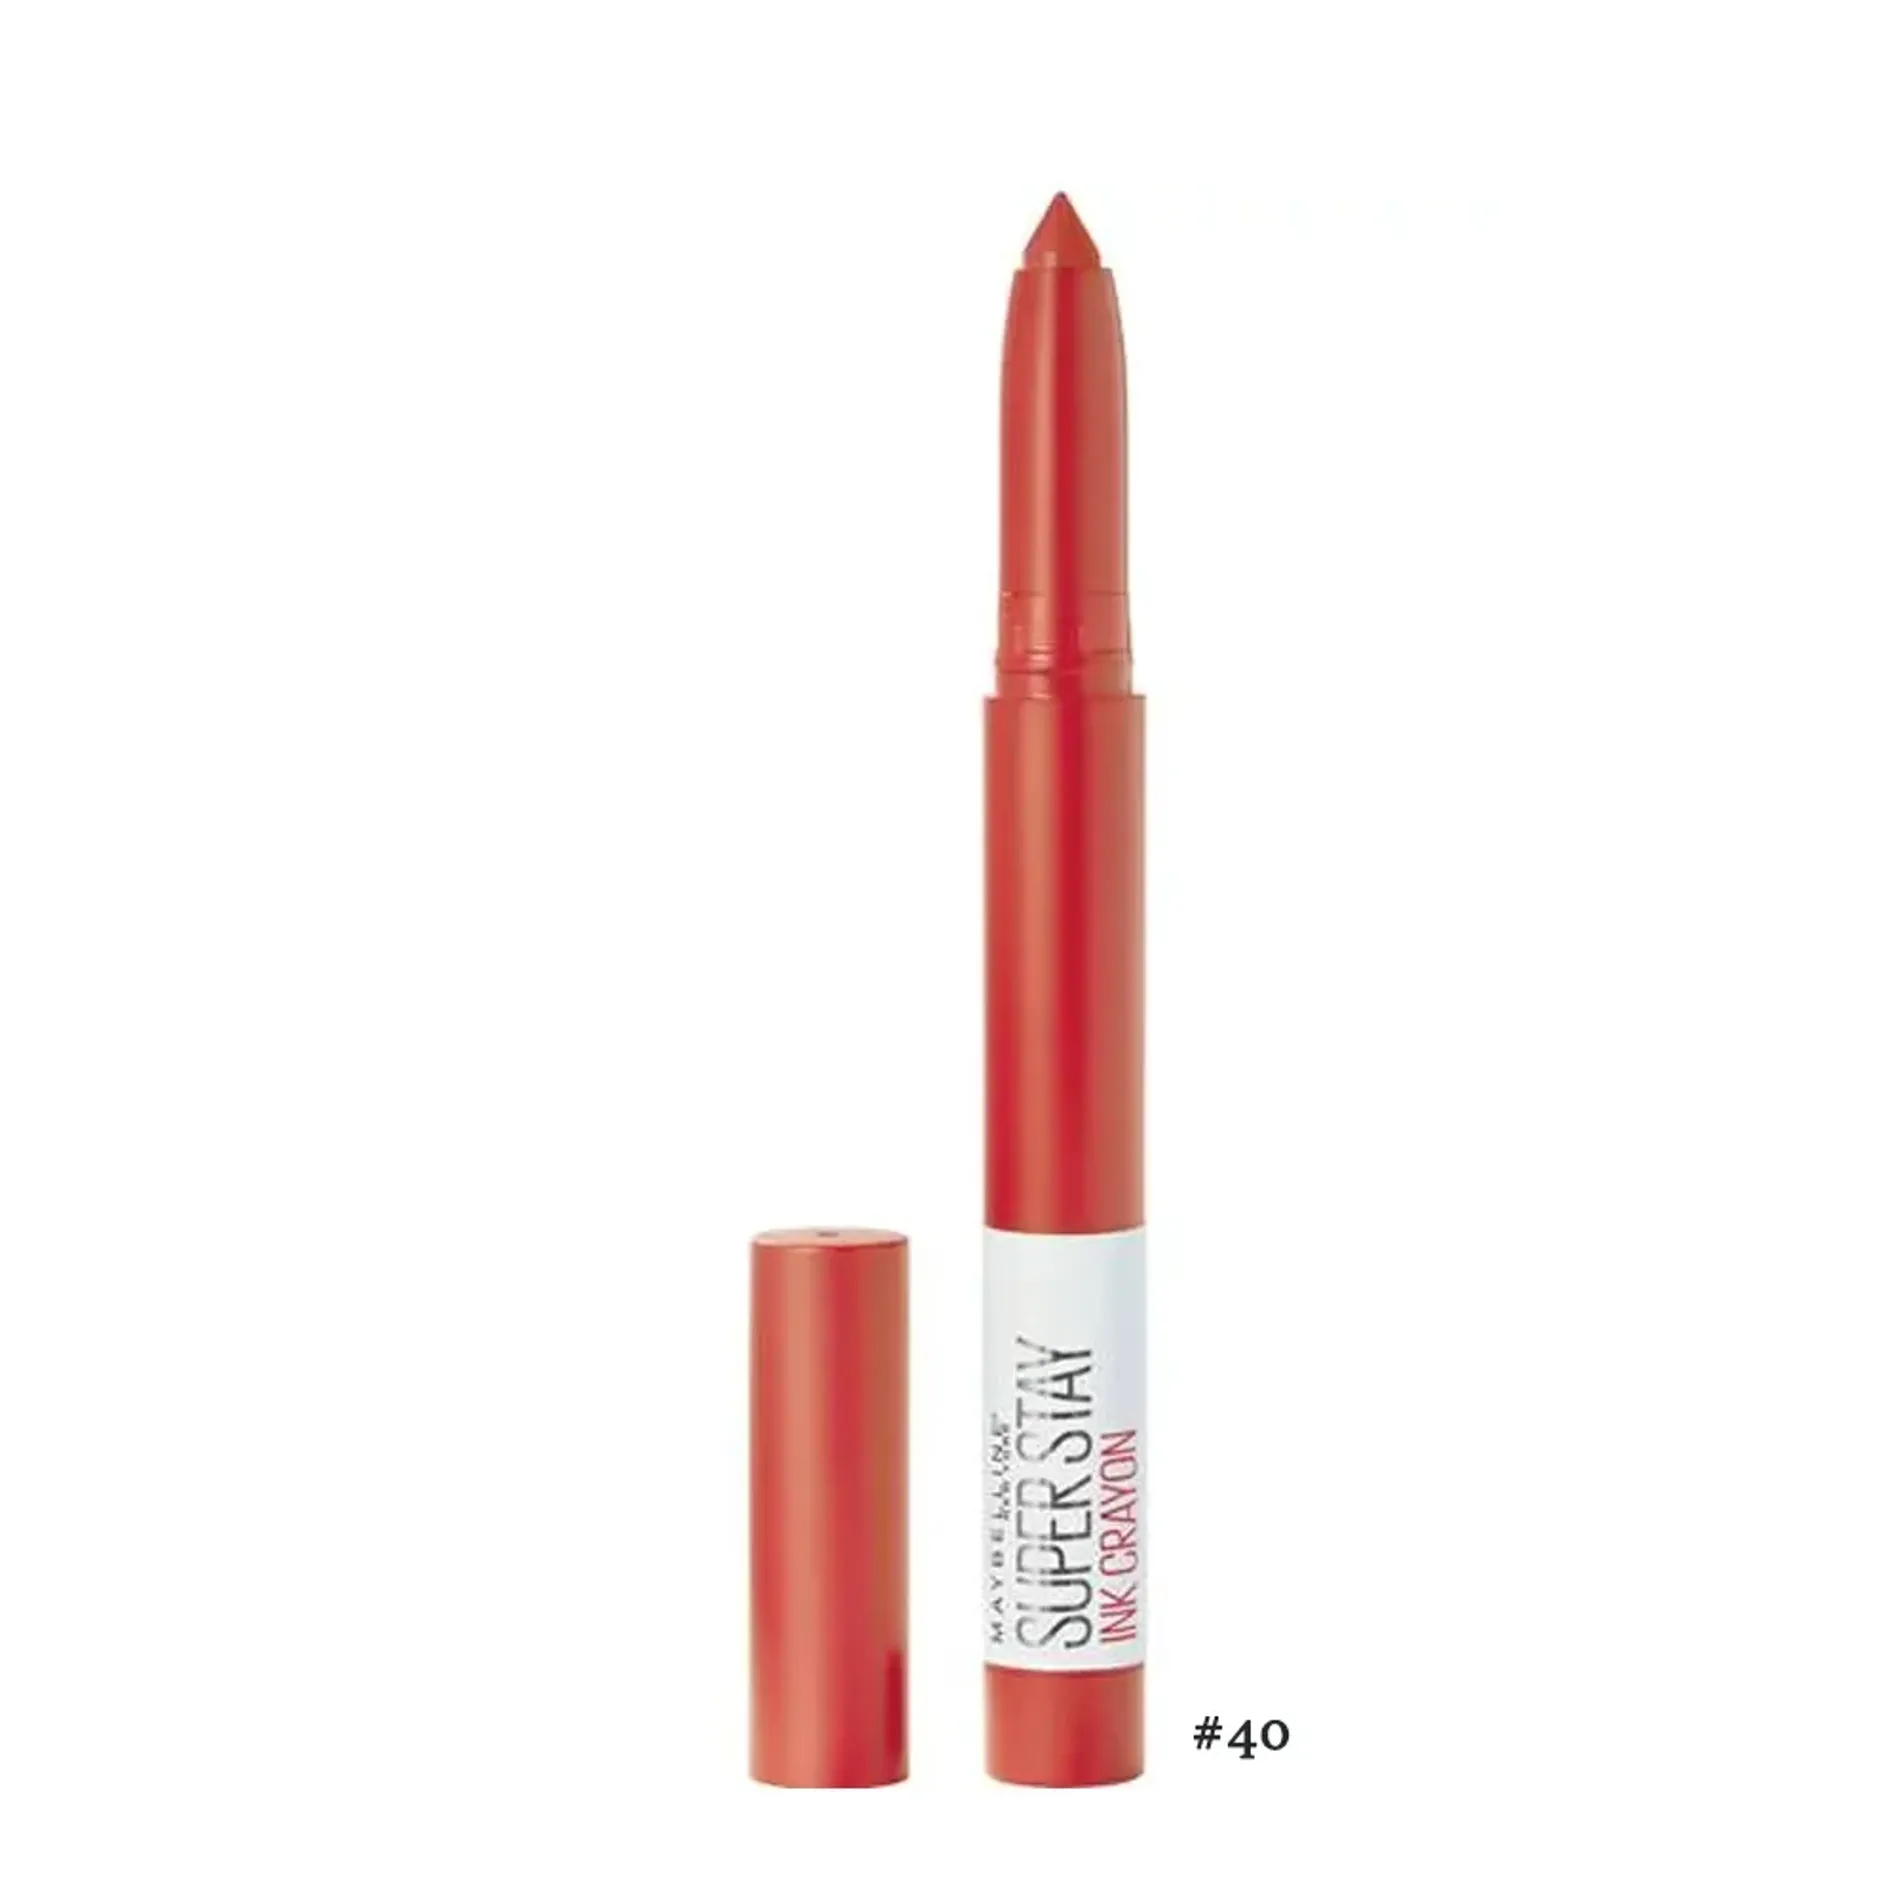 son-but-chi-lau-troi-maybelline-superstay-ink-crayon-3-9g-15